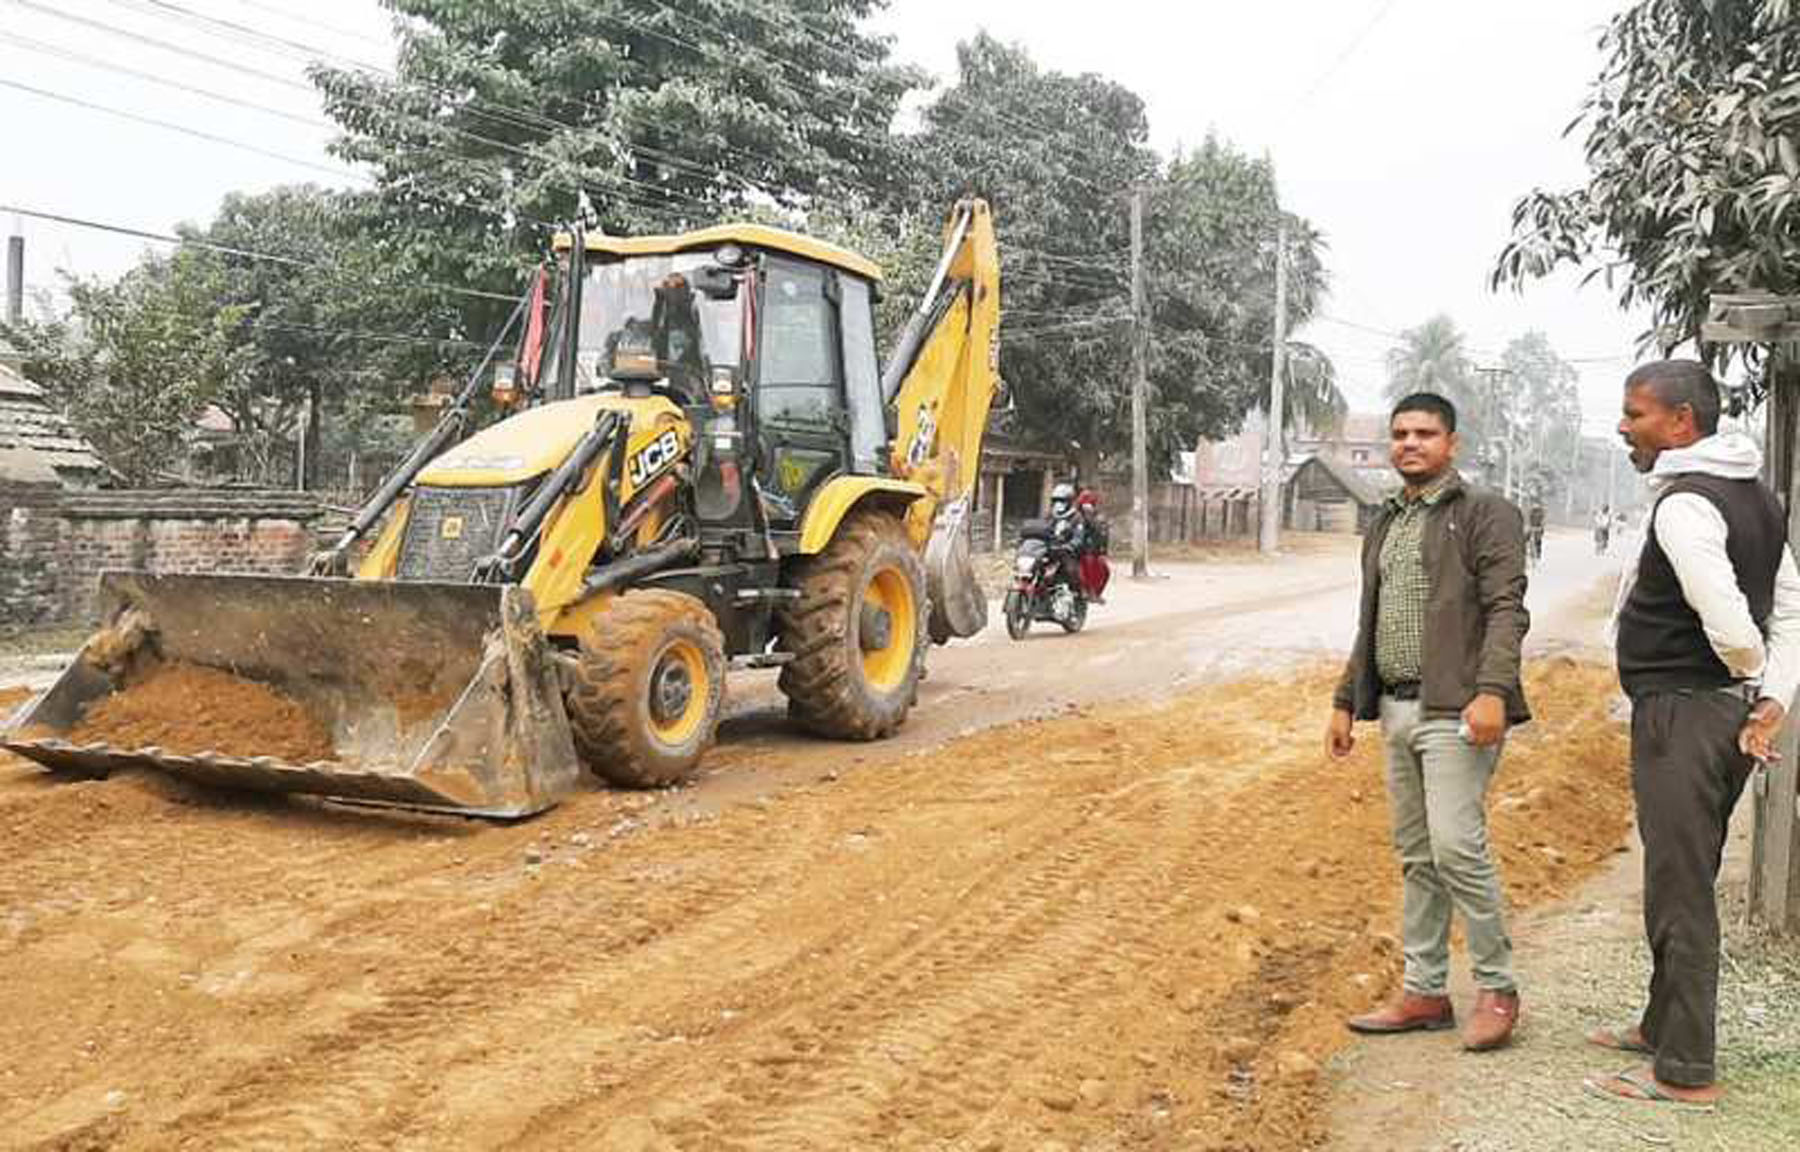 Gamgadhi-Nakchelagna road project reports 18-km construction in 17 years